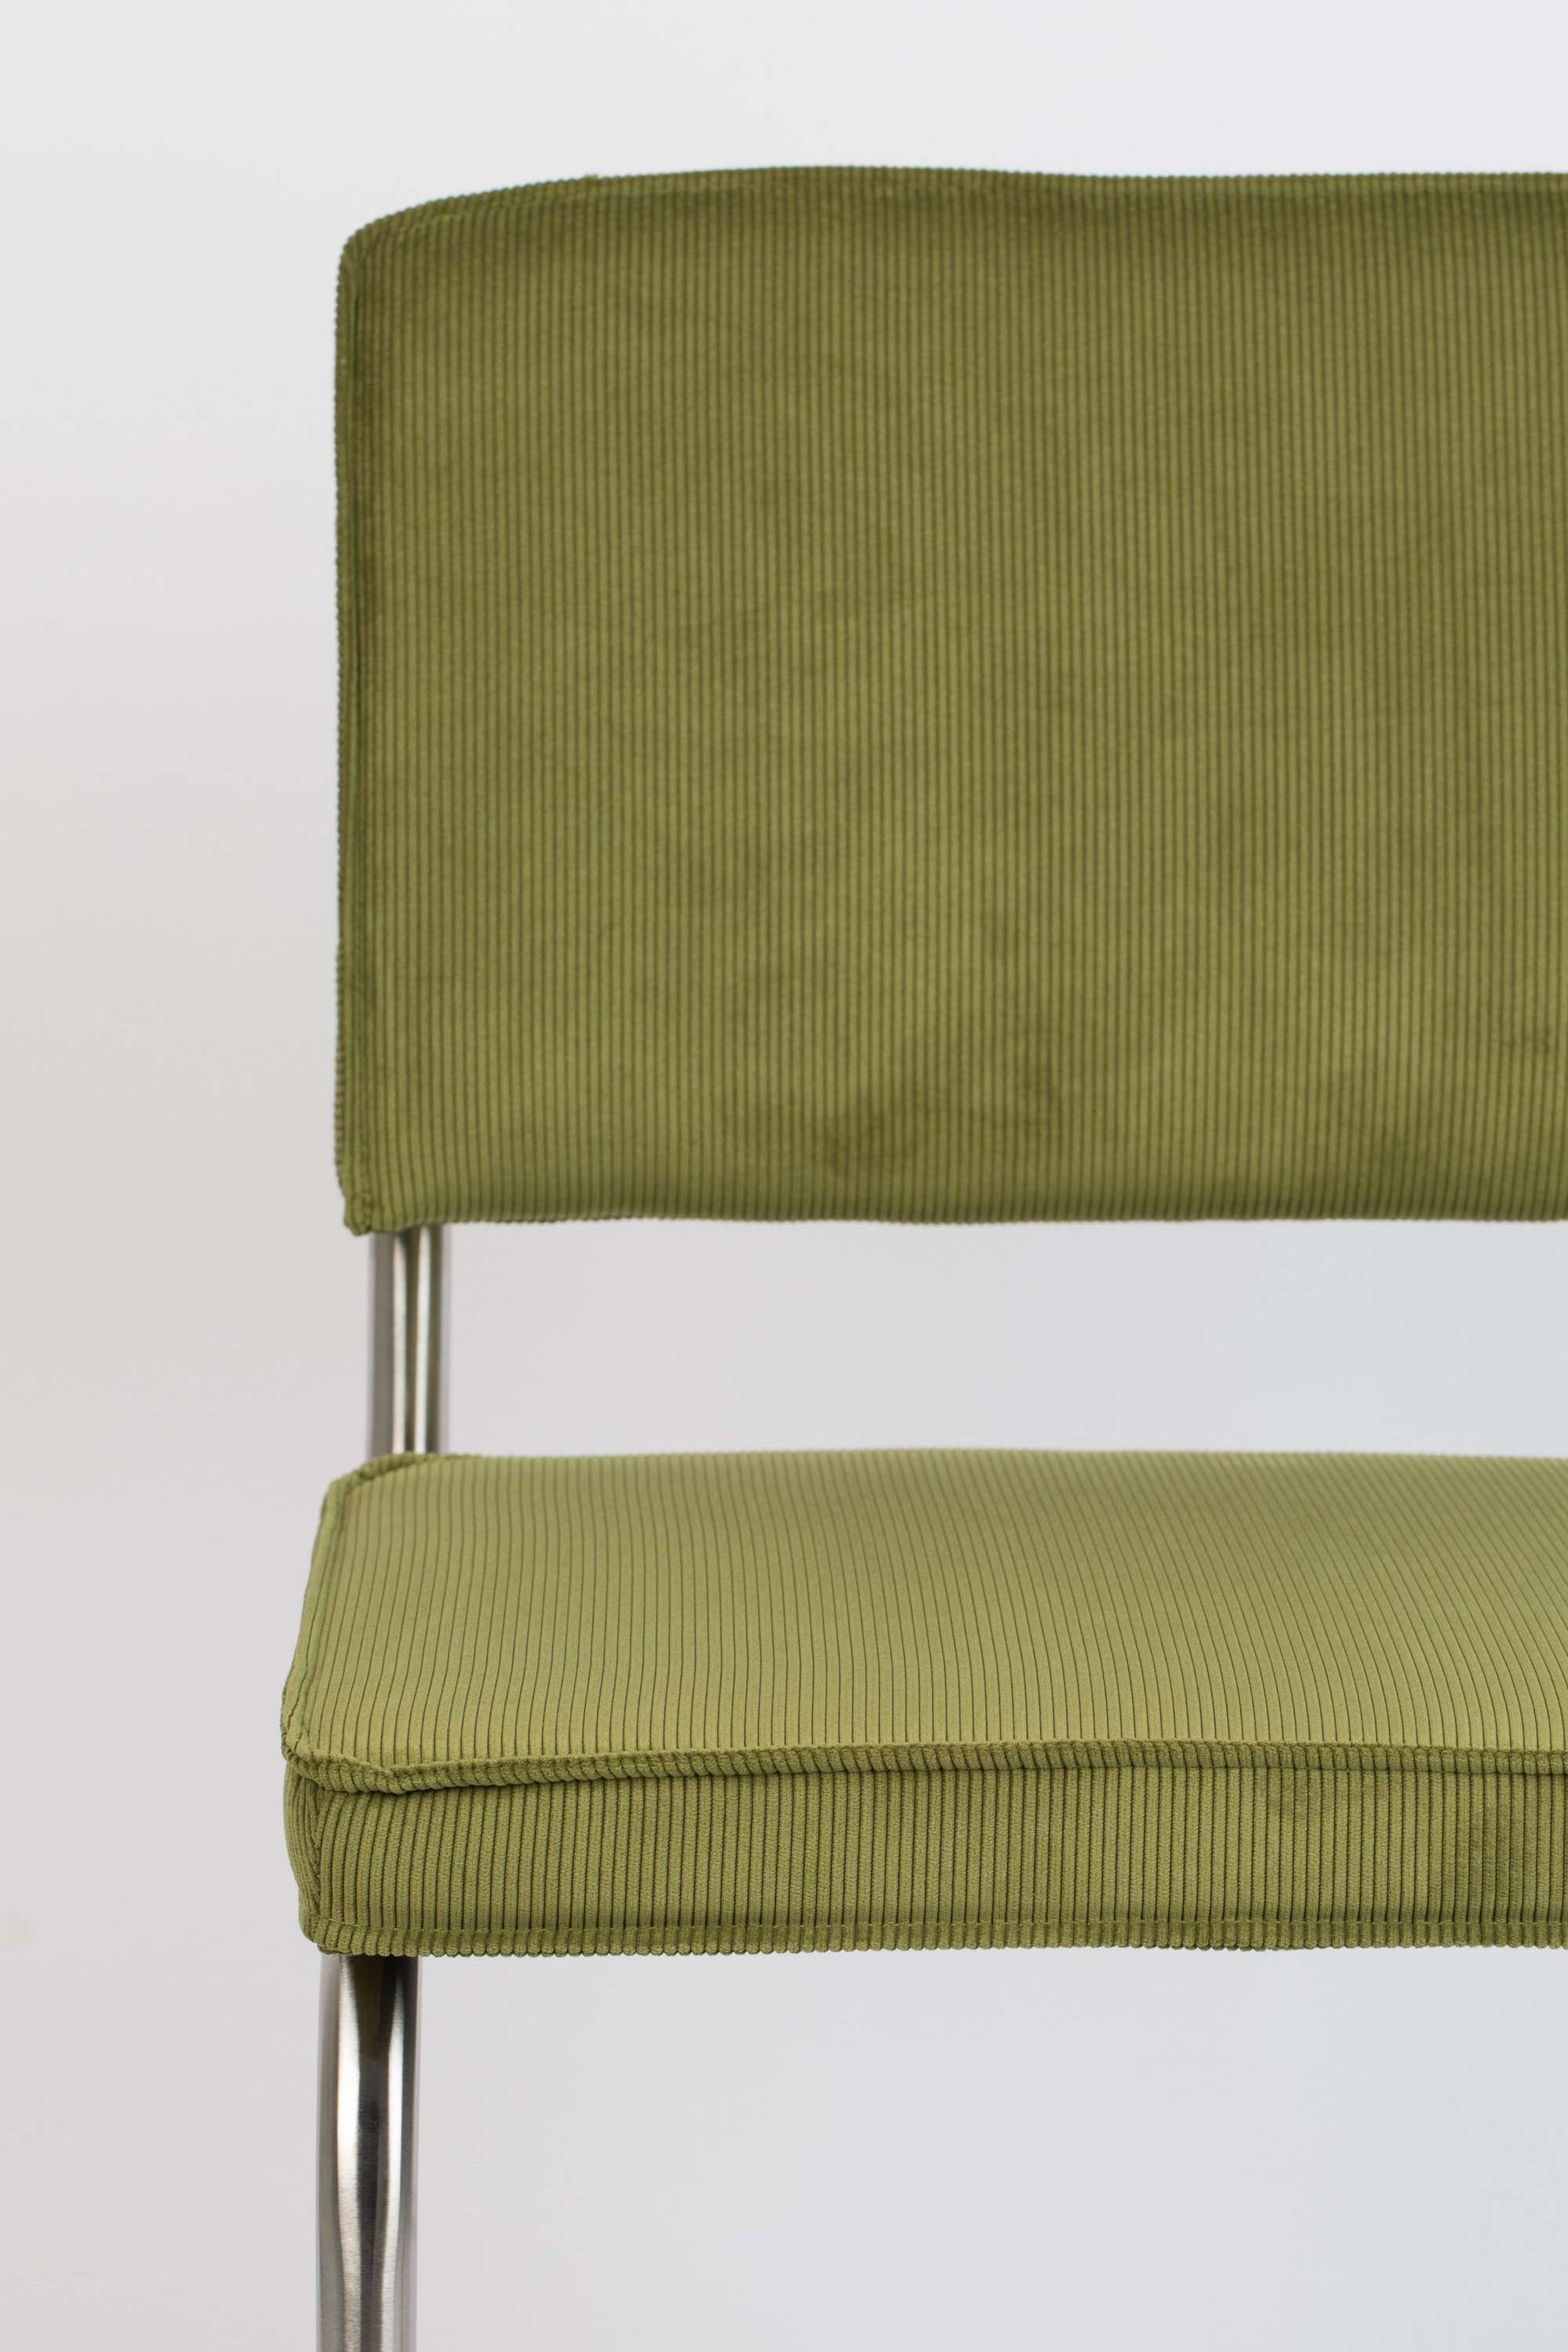 Zuiver | CHAIR RIDGE BRUSHED RIB GREEN 25A Default Title